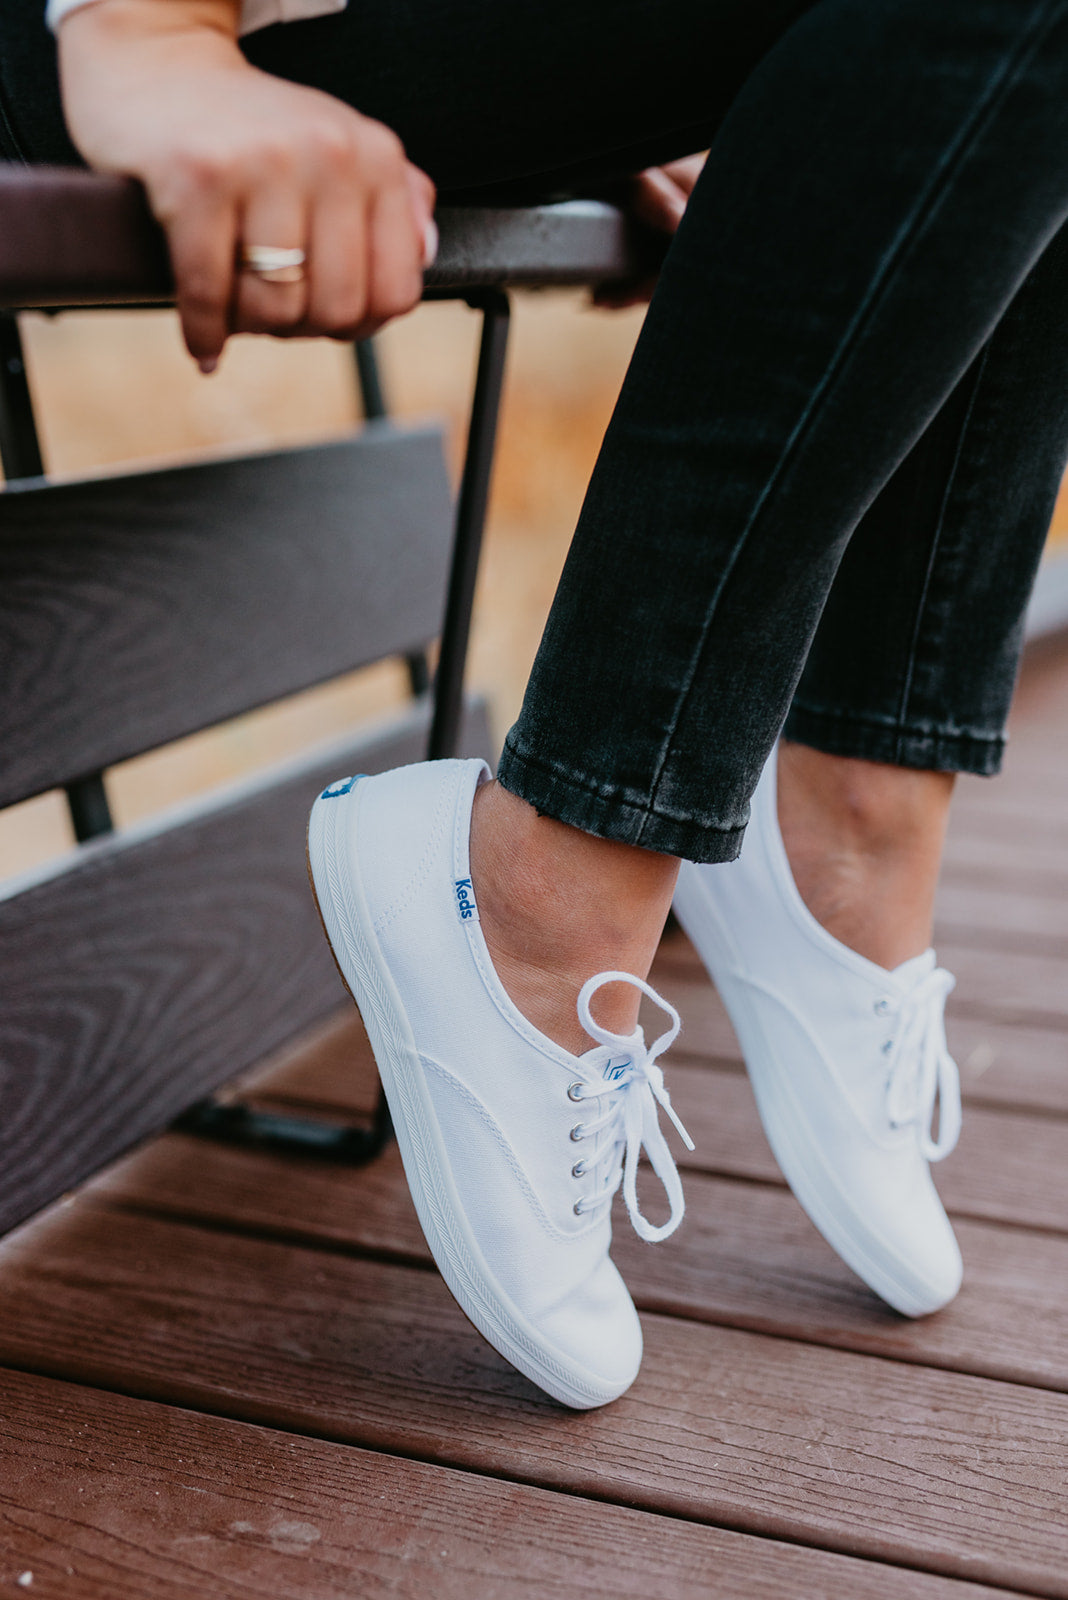 CHAMPION WHITE SNEAKERS - KEDS